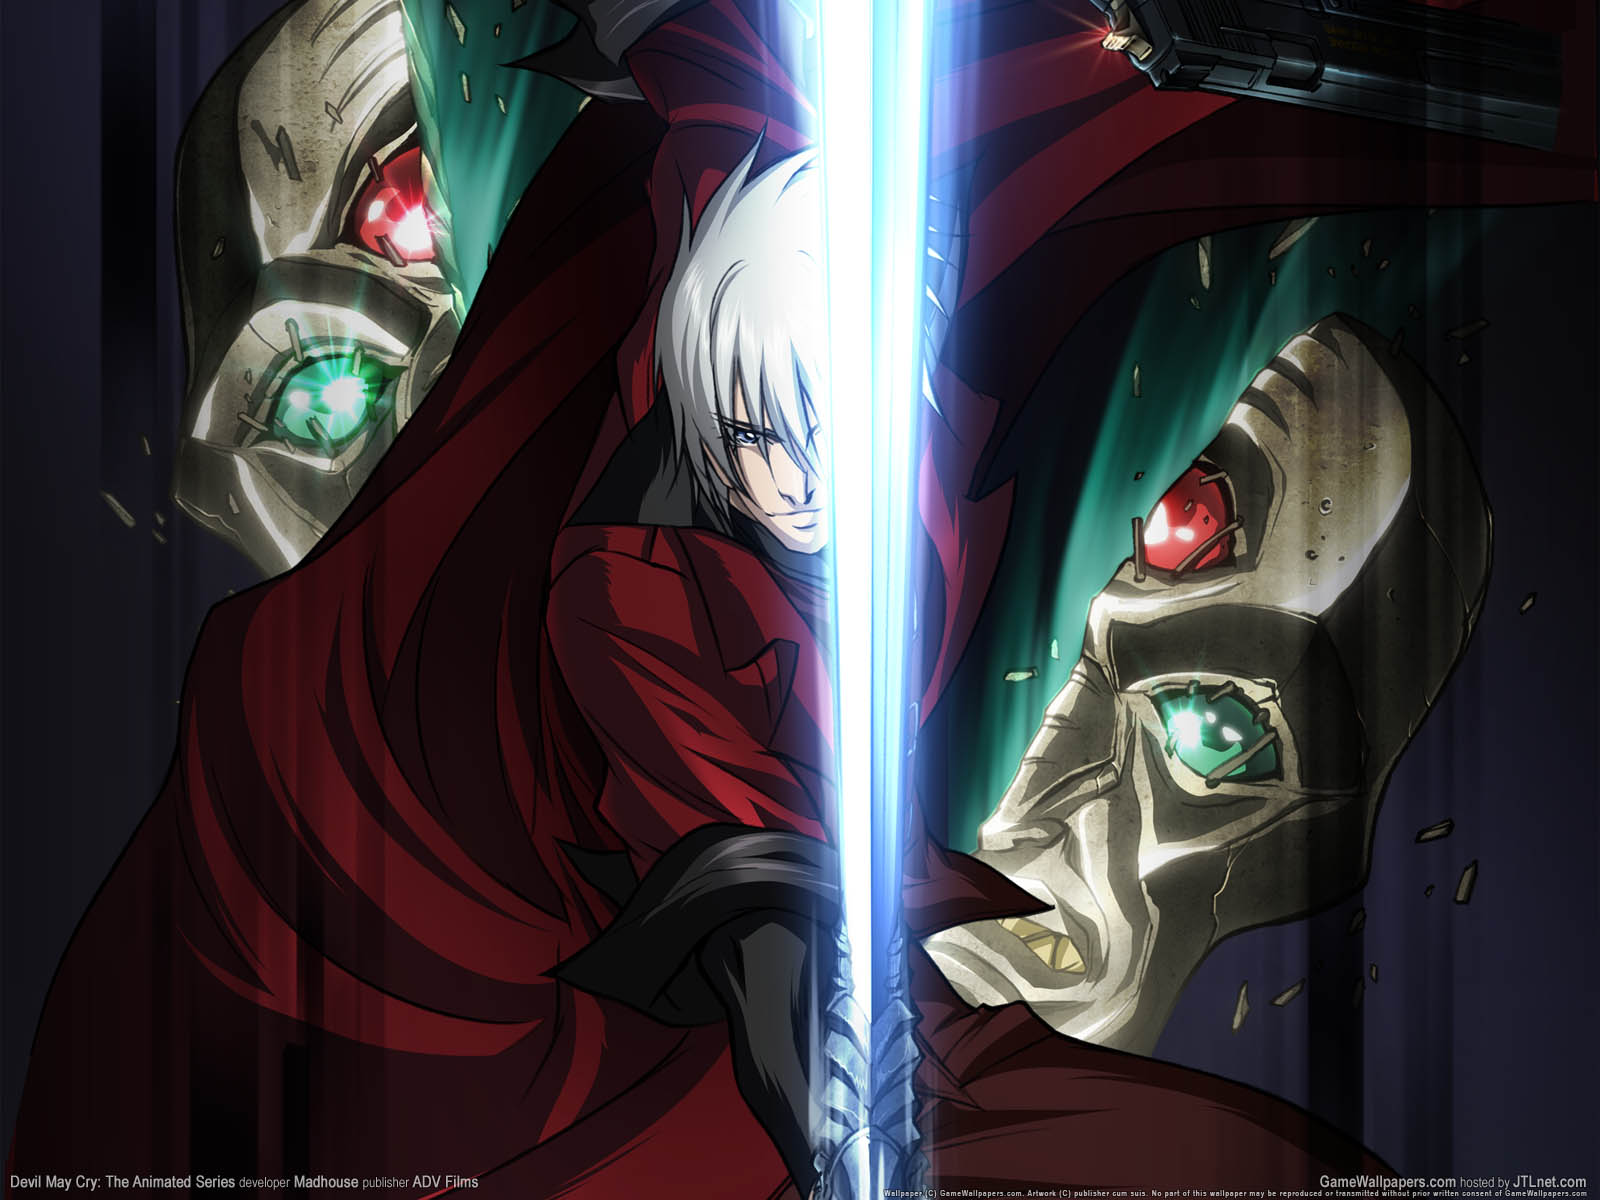 Devil May Cry%3A The Animated Series wallpaper 01 1600x1200